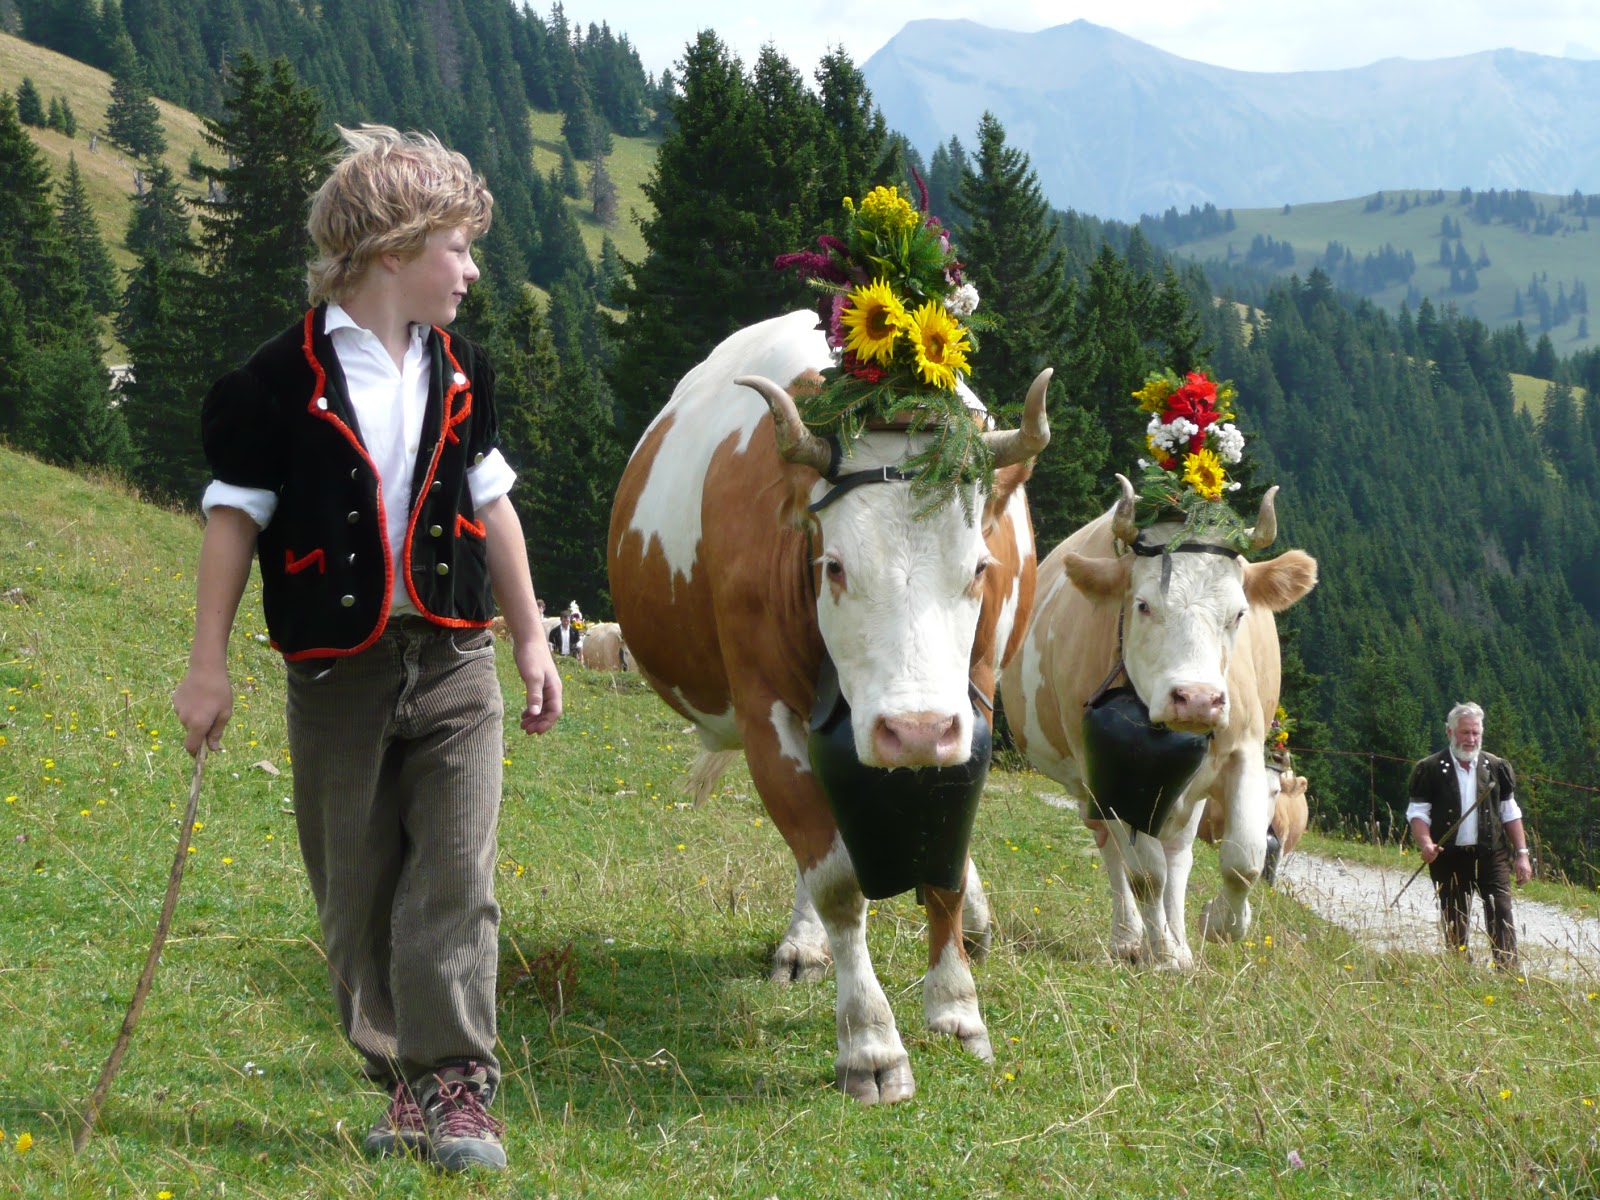 'Züglete'—a must-see for families especially with children. Photo: Gstaad Saanenland Tourismus.